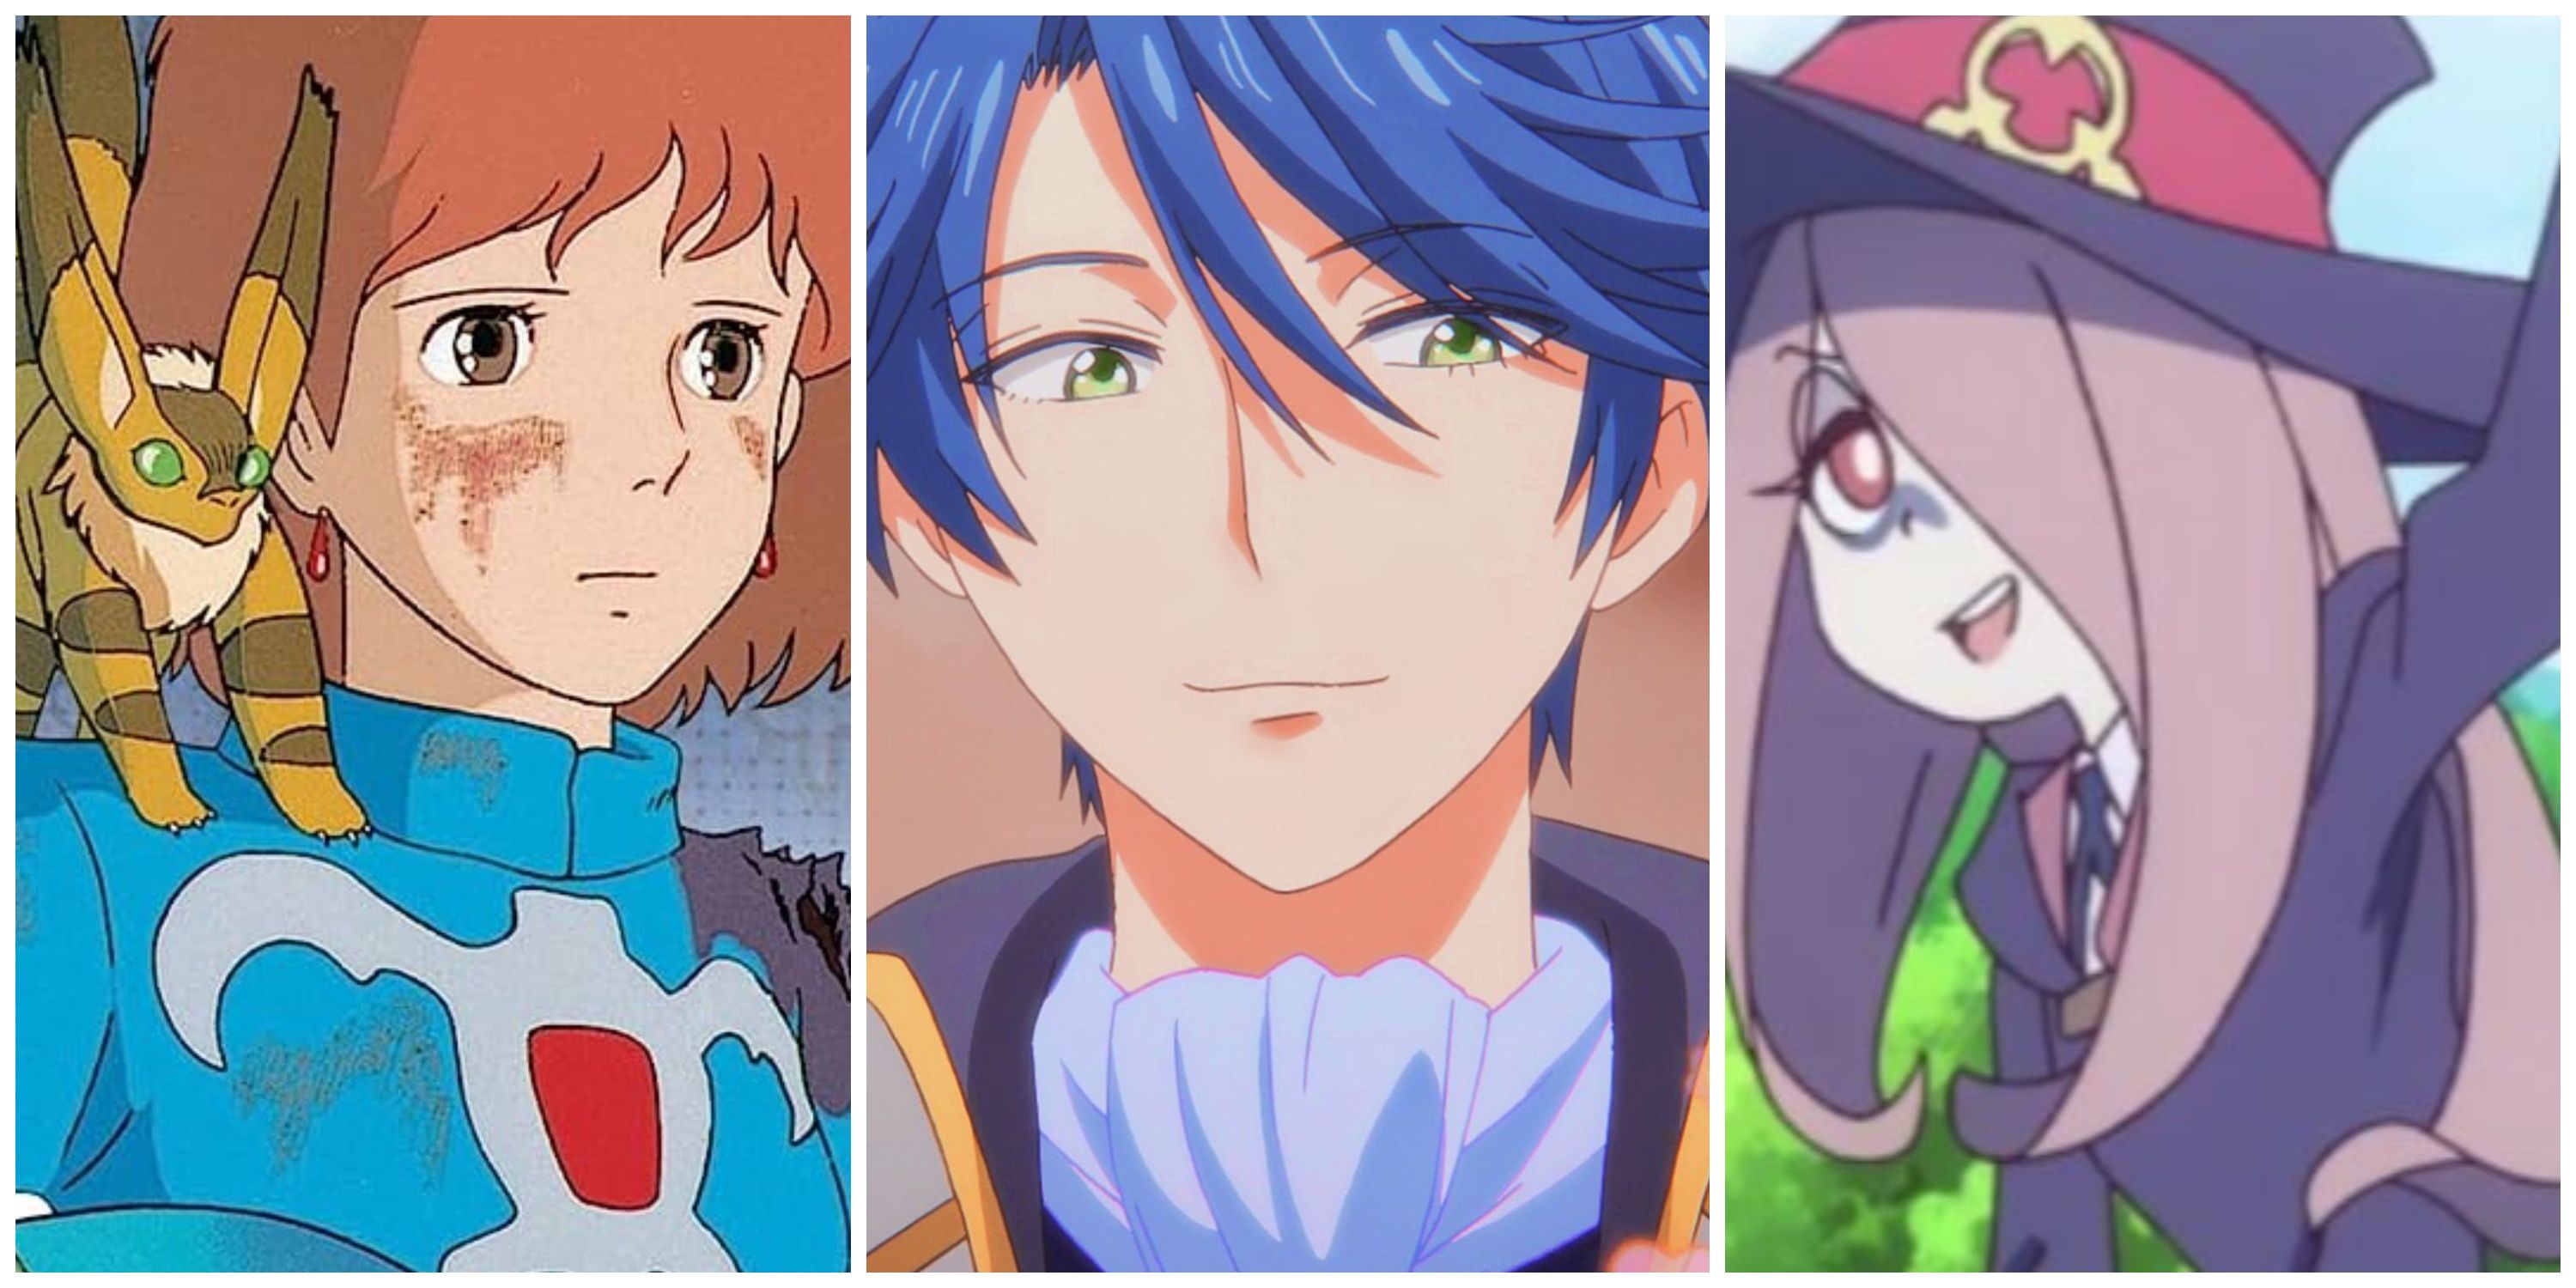 Split image, Nausicaa from Nausicaa of the Valley of the Wind, Kashima from Monthly Girls Nozaki kun, Sucy from Little Witch Academia